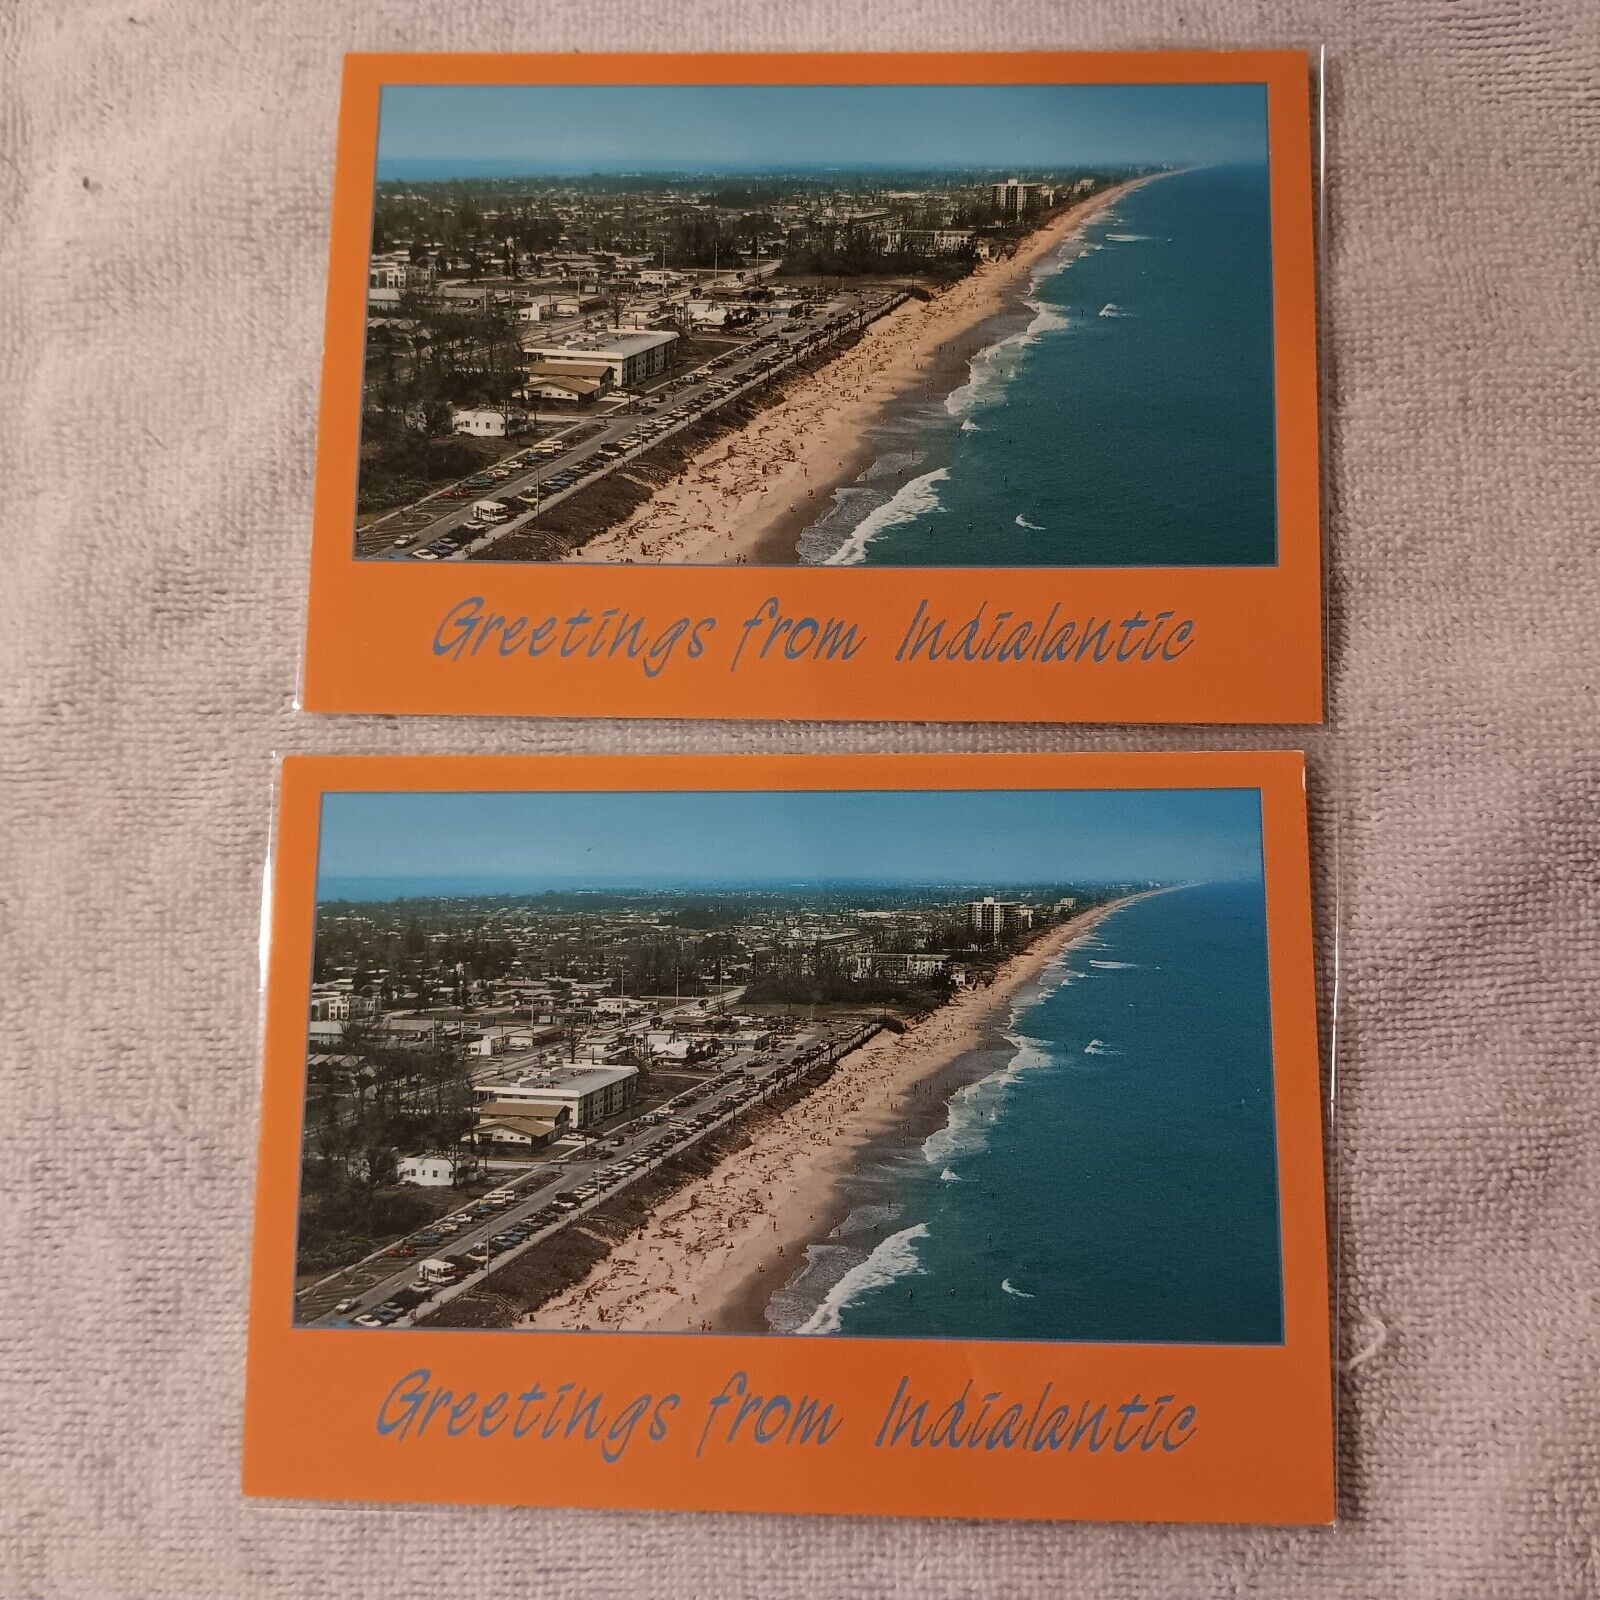 Vintage Postcards Lot Of 2 Greetings From Indialantic Florida International